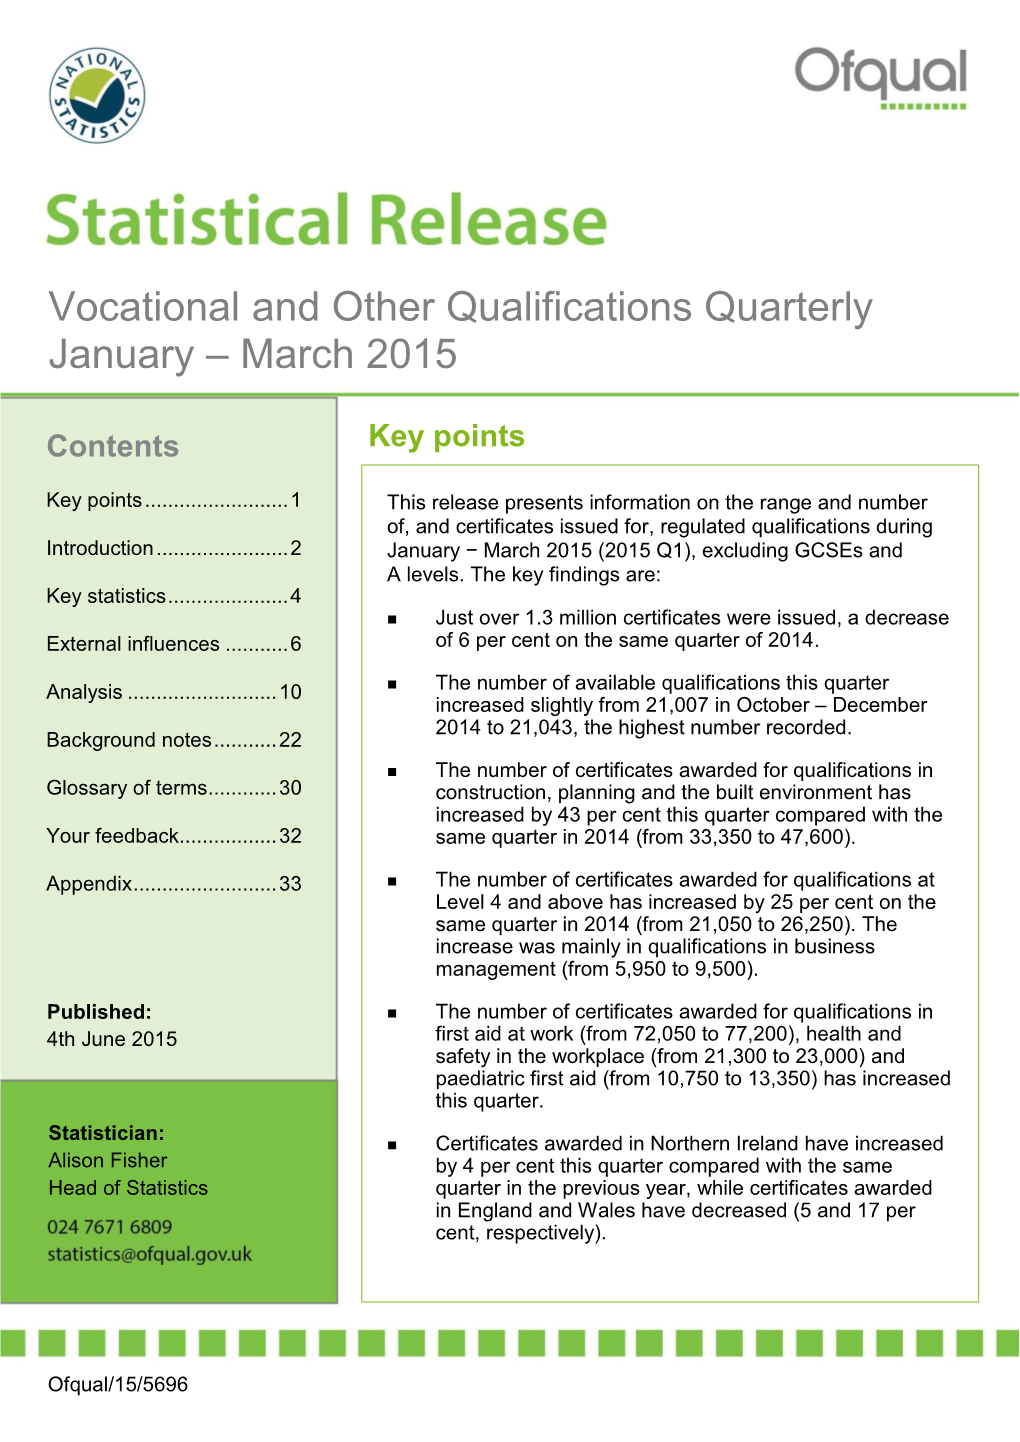 Vocational and Other Qualifications Quarterly January – March 2015